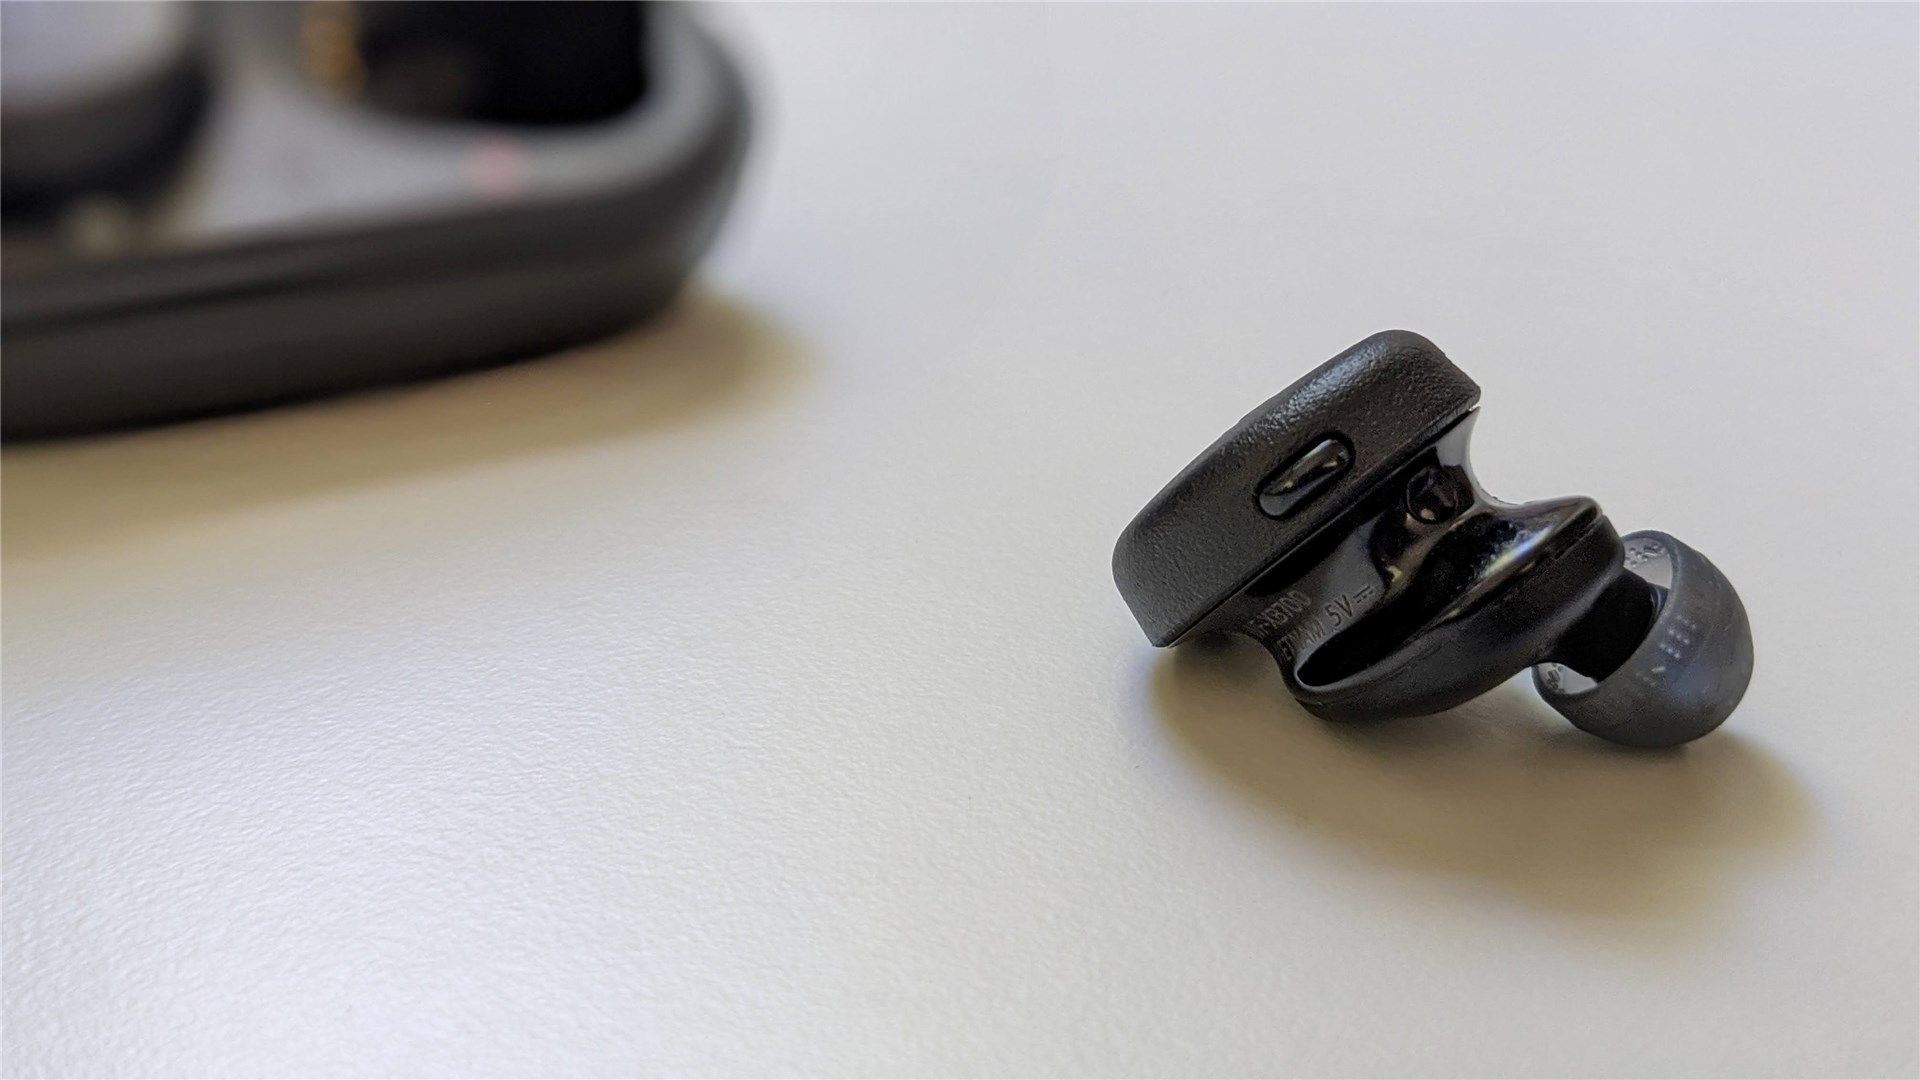 Showing the button on the right Sony Extra Bass earbuds